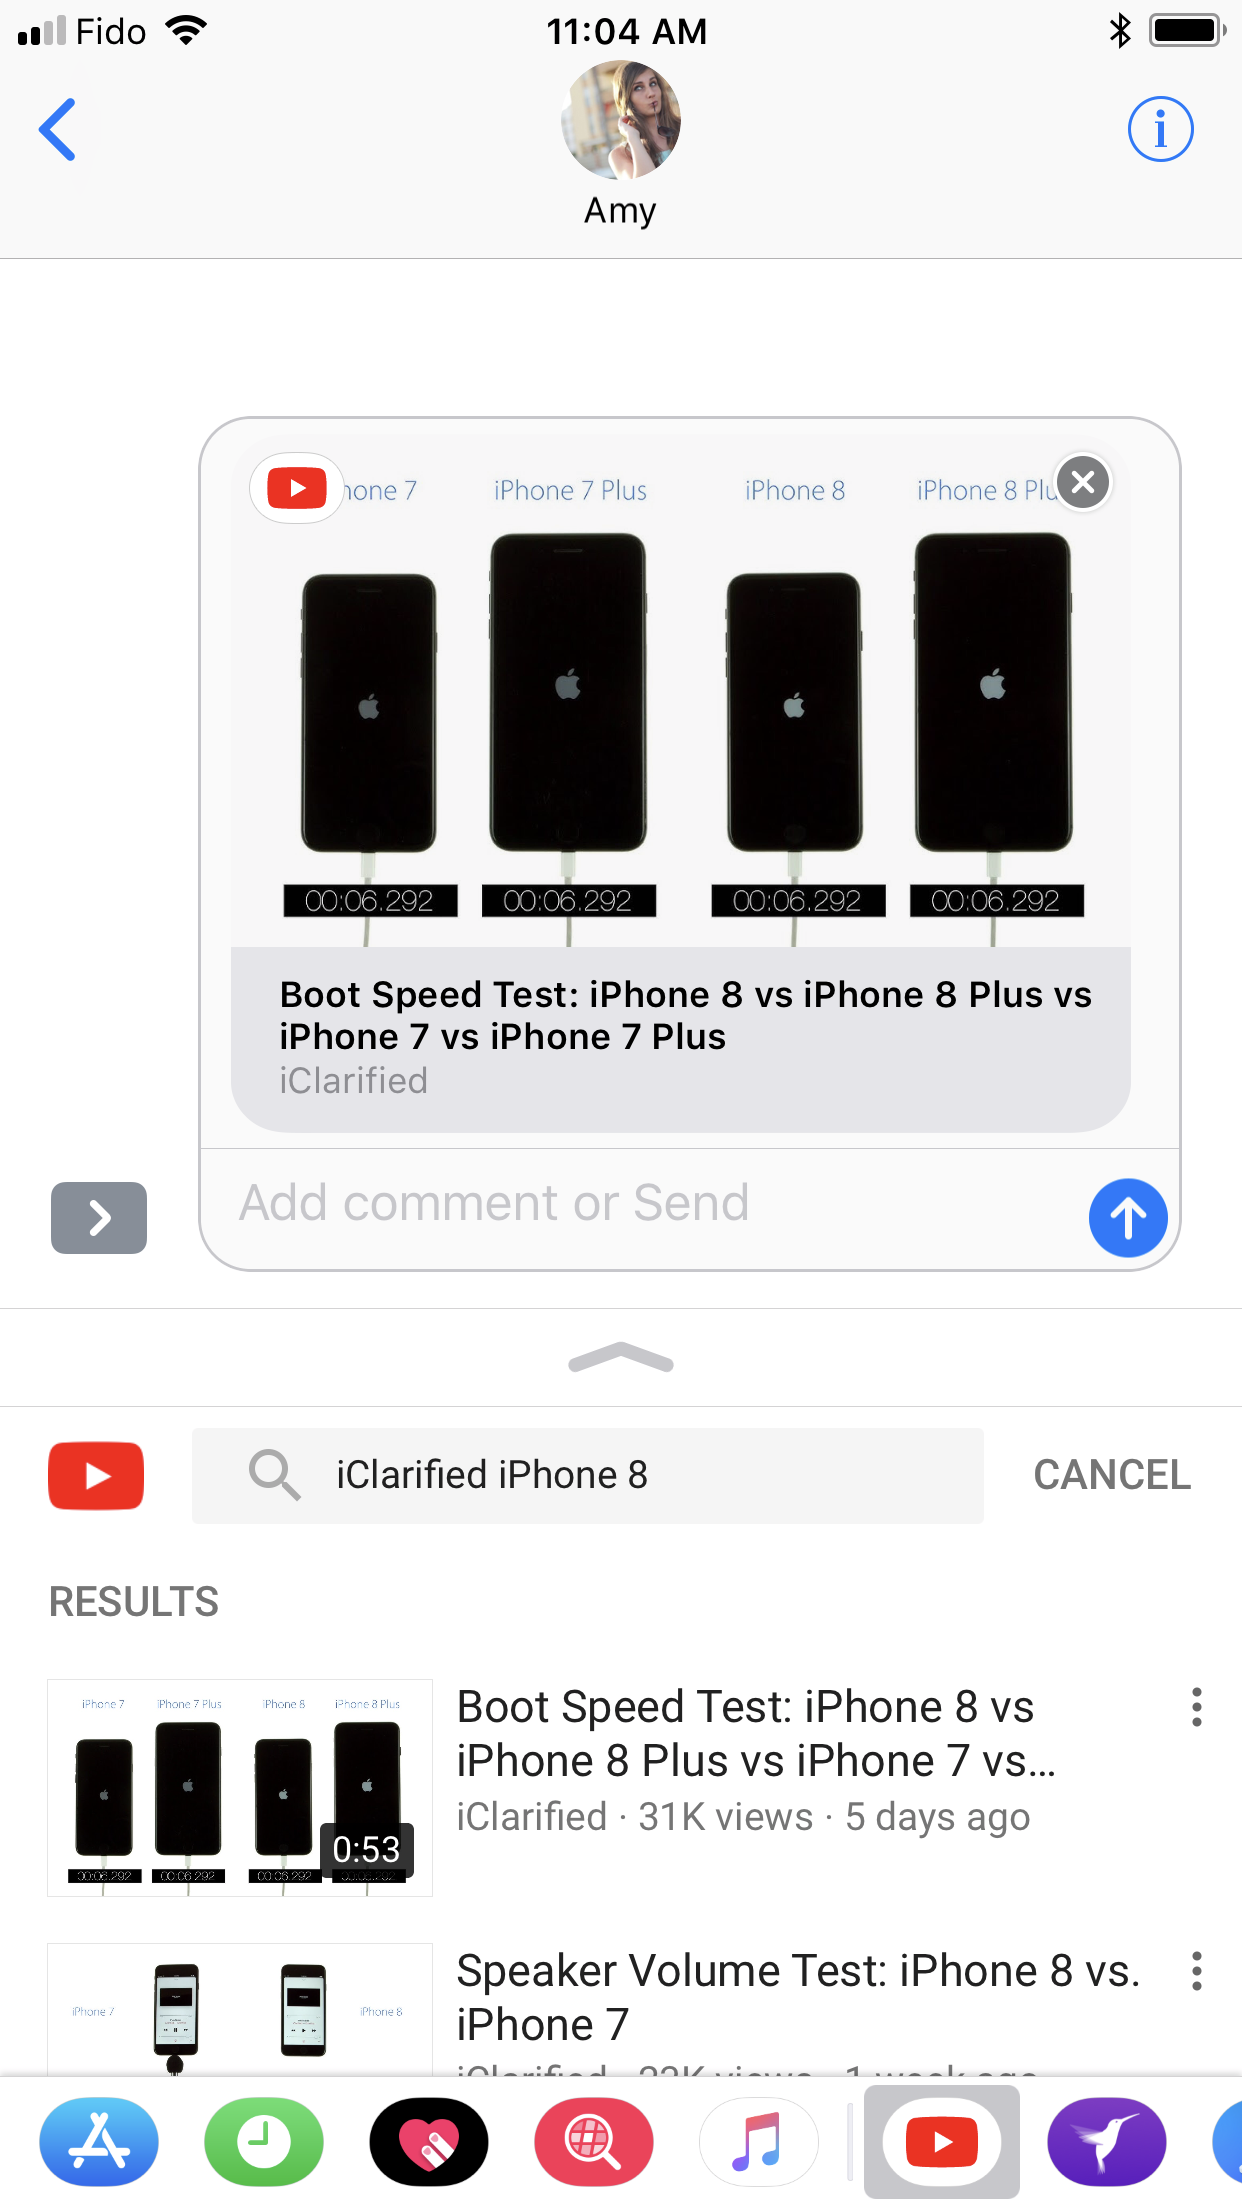 YouTube App Gains Support for iMessage